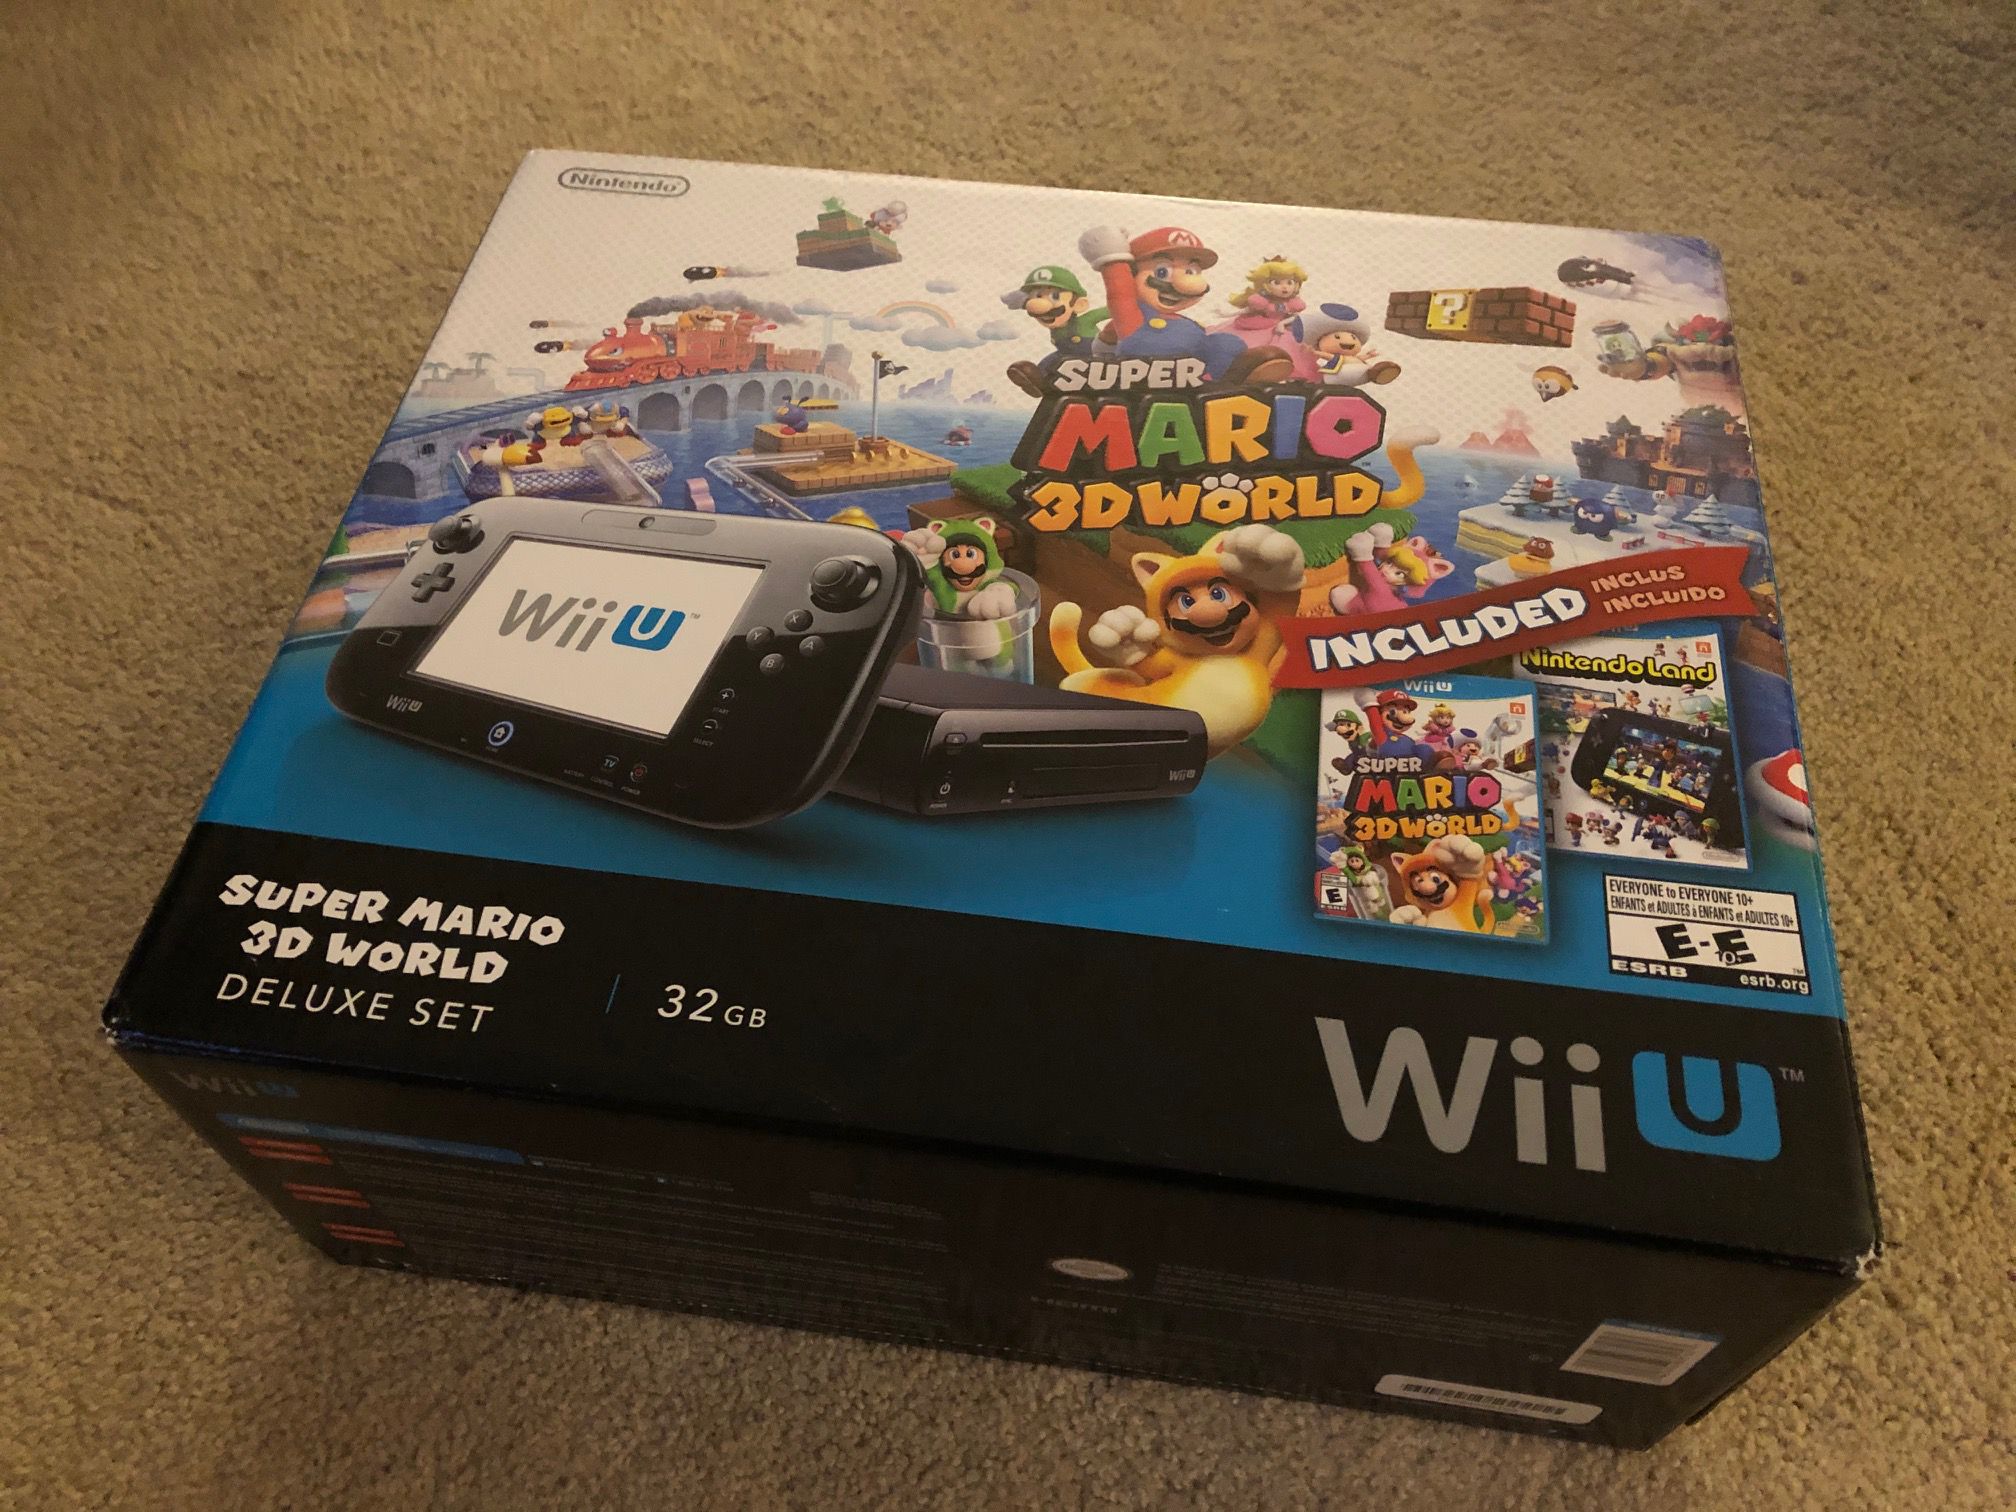 Nintendo Wii U Video Game System in Box with NintendoLand Game